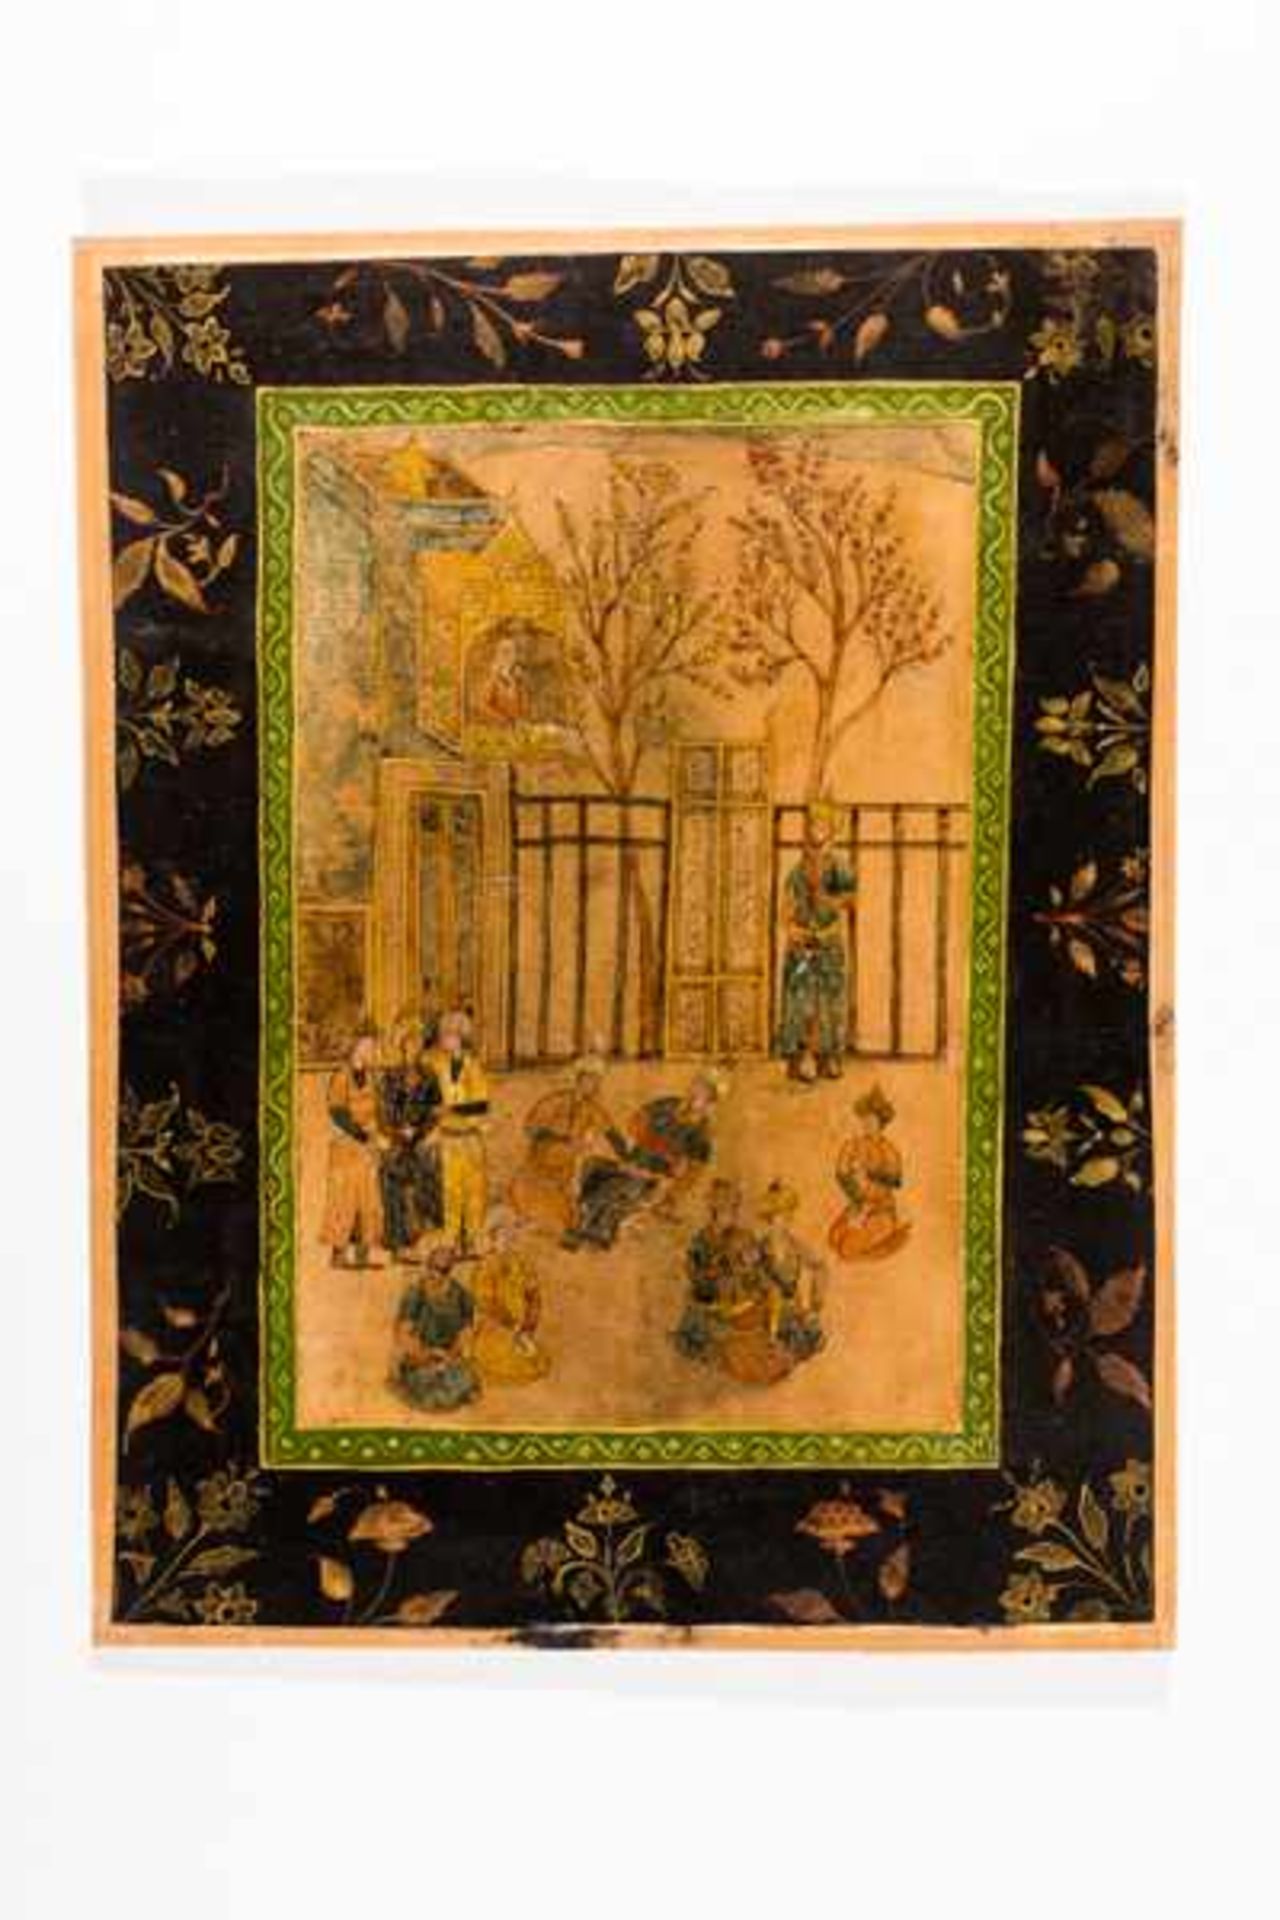 COURTLY SCENE AND FLOWER BOUQUET Paint and gold on leather, or paper. Indo-Persia, about - Image 2 of 2